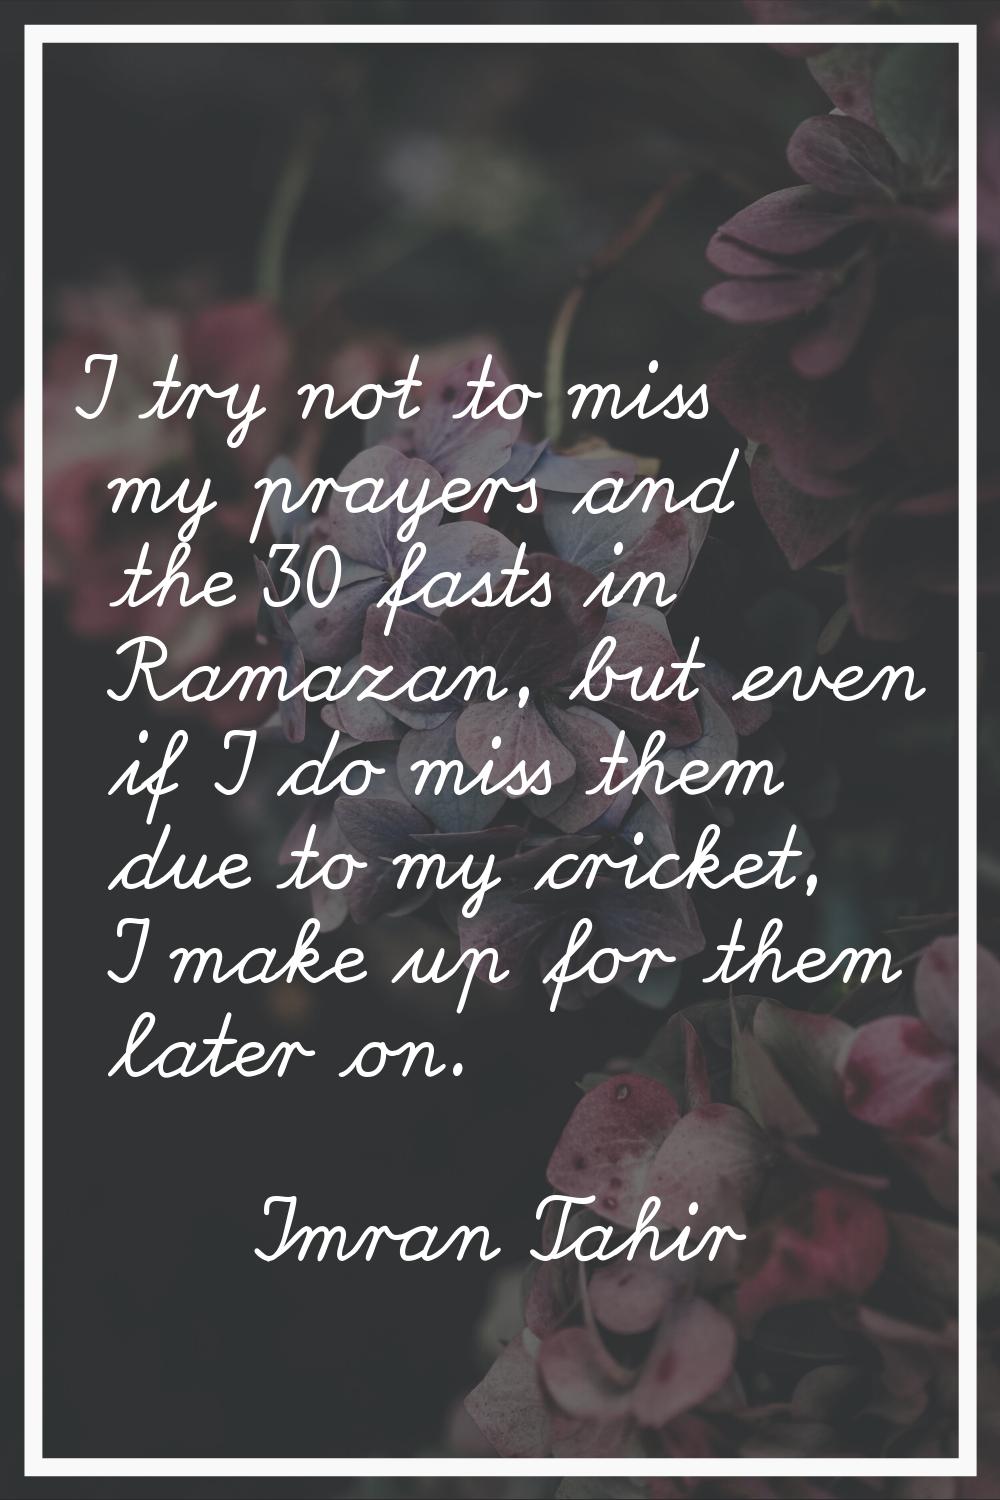 I try not to miss my prayers and the 30 fasts in Ramazan, but even if I do miss them due to my cric